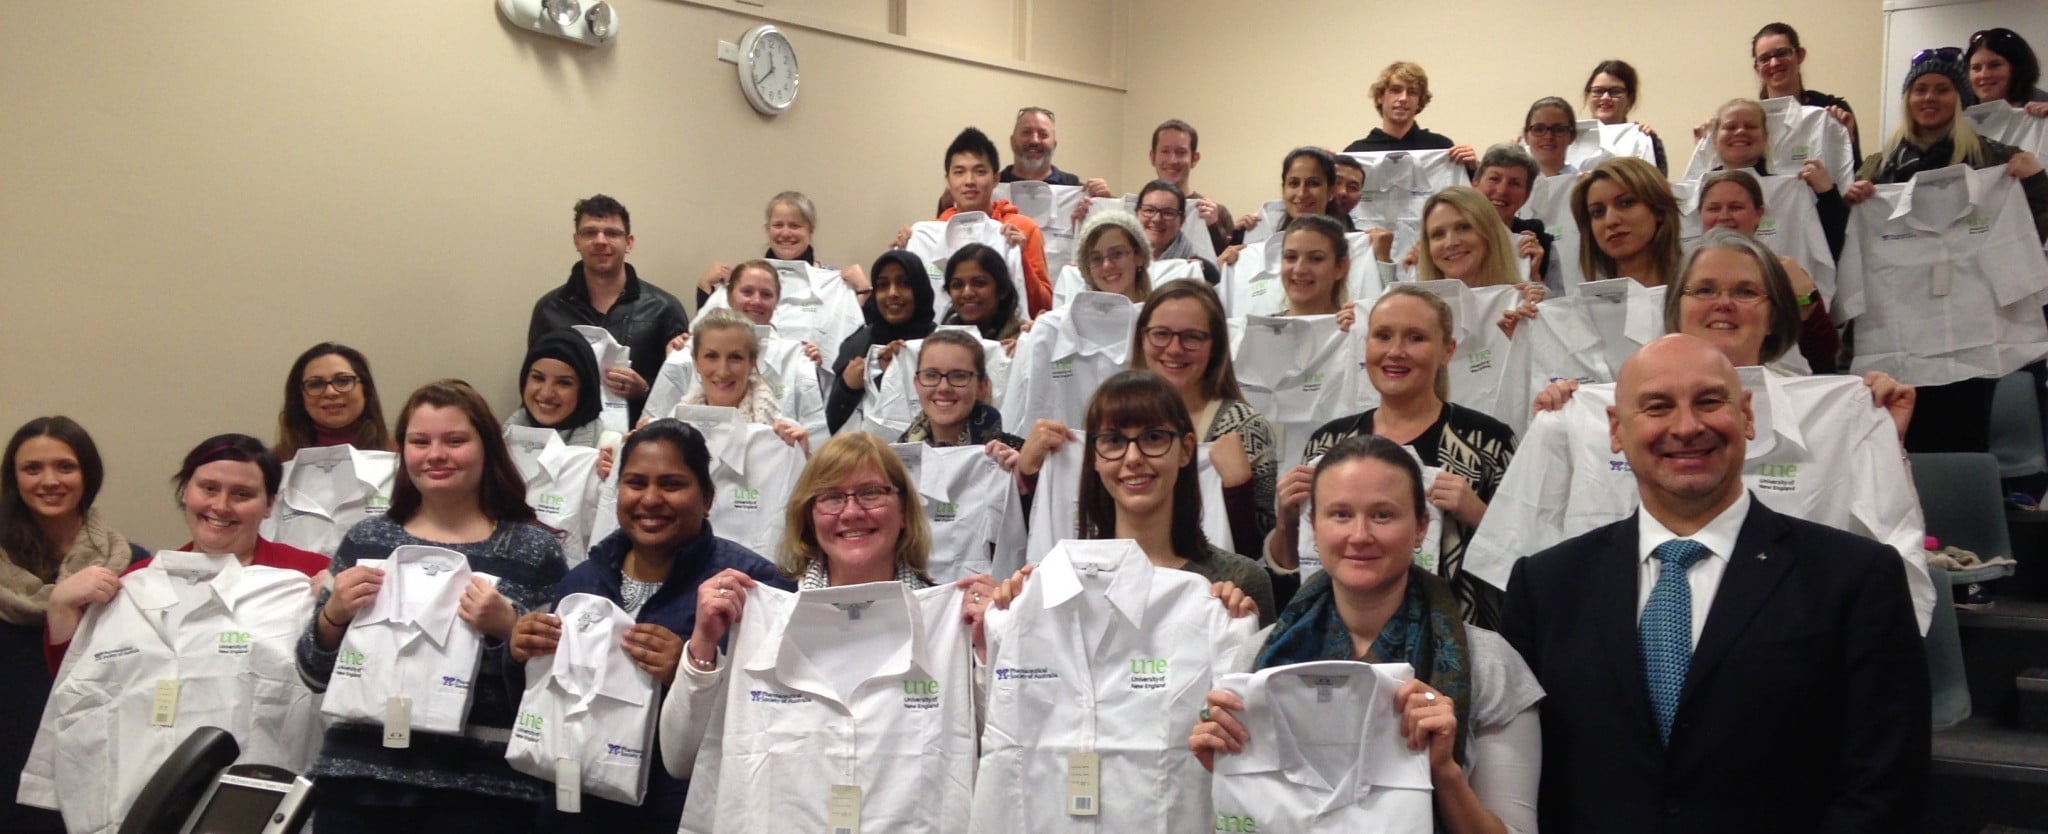 UNE's new pharmacy students show off their white shirts